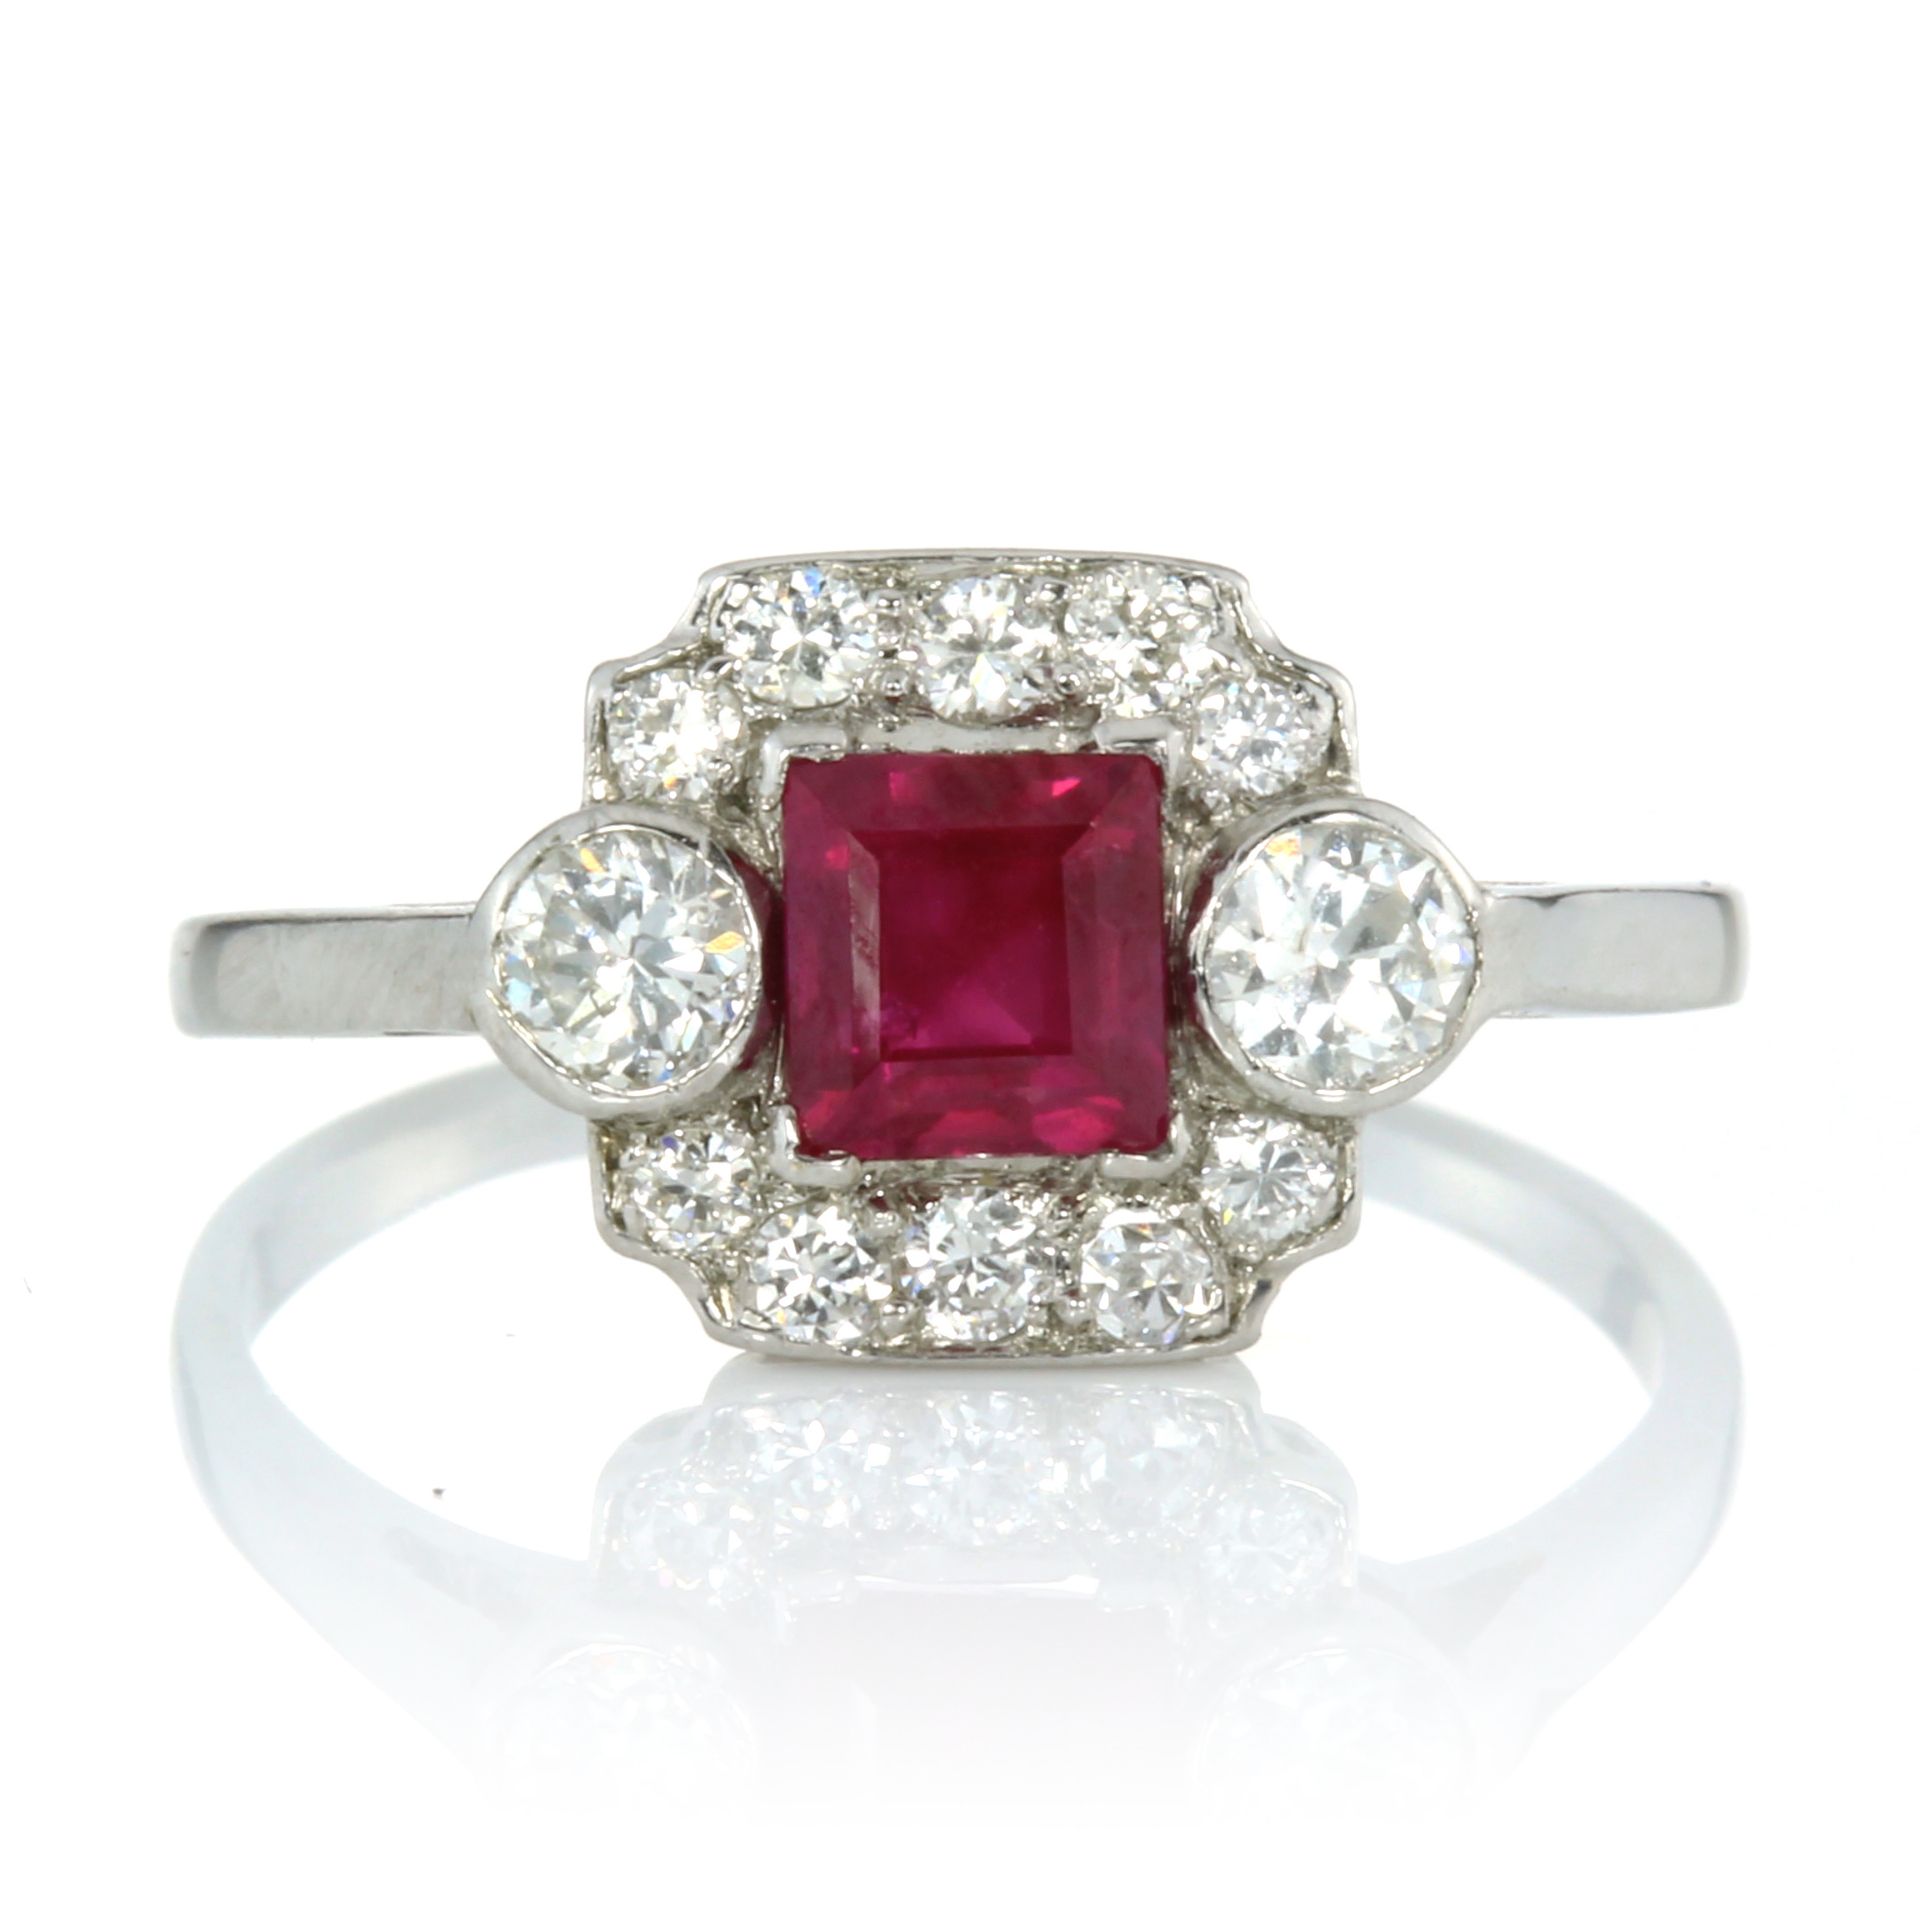 A RUBY AND DIAMOND DRESS RING set with a central square step cut ruby of 0.83 carats flanked on